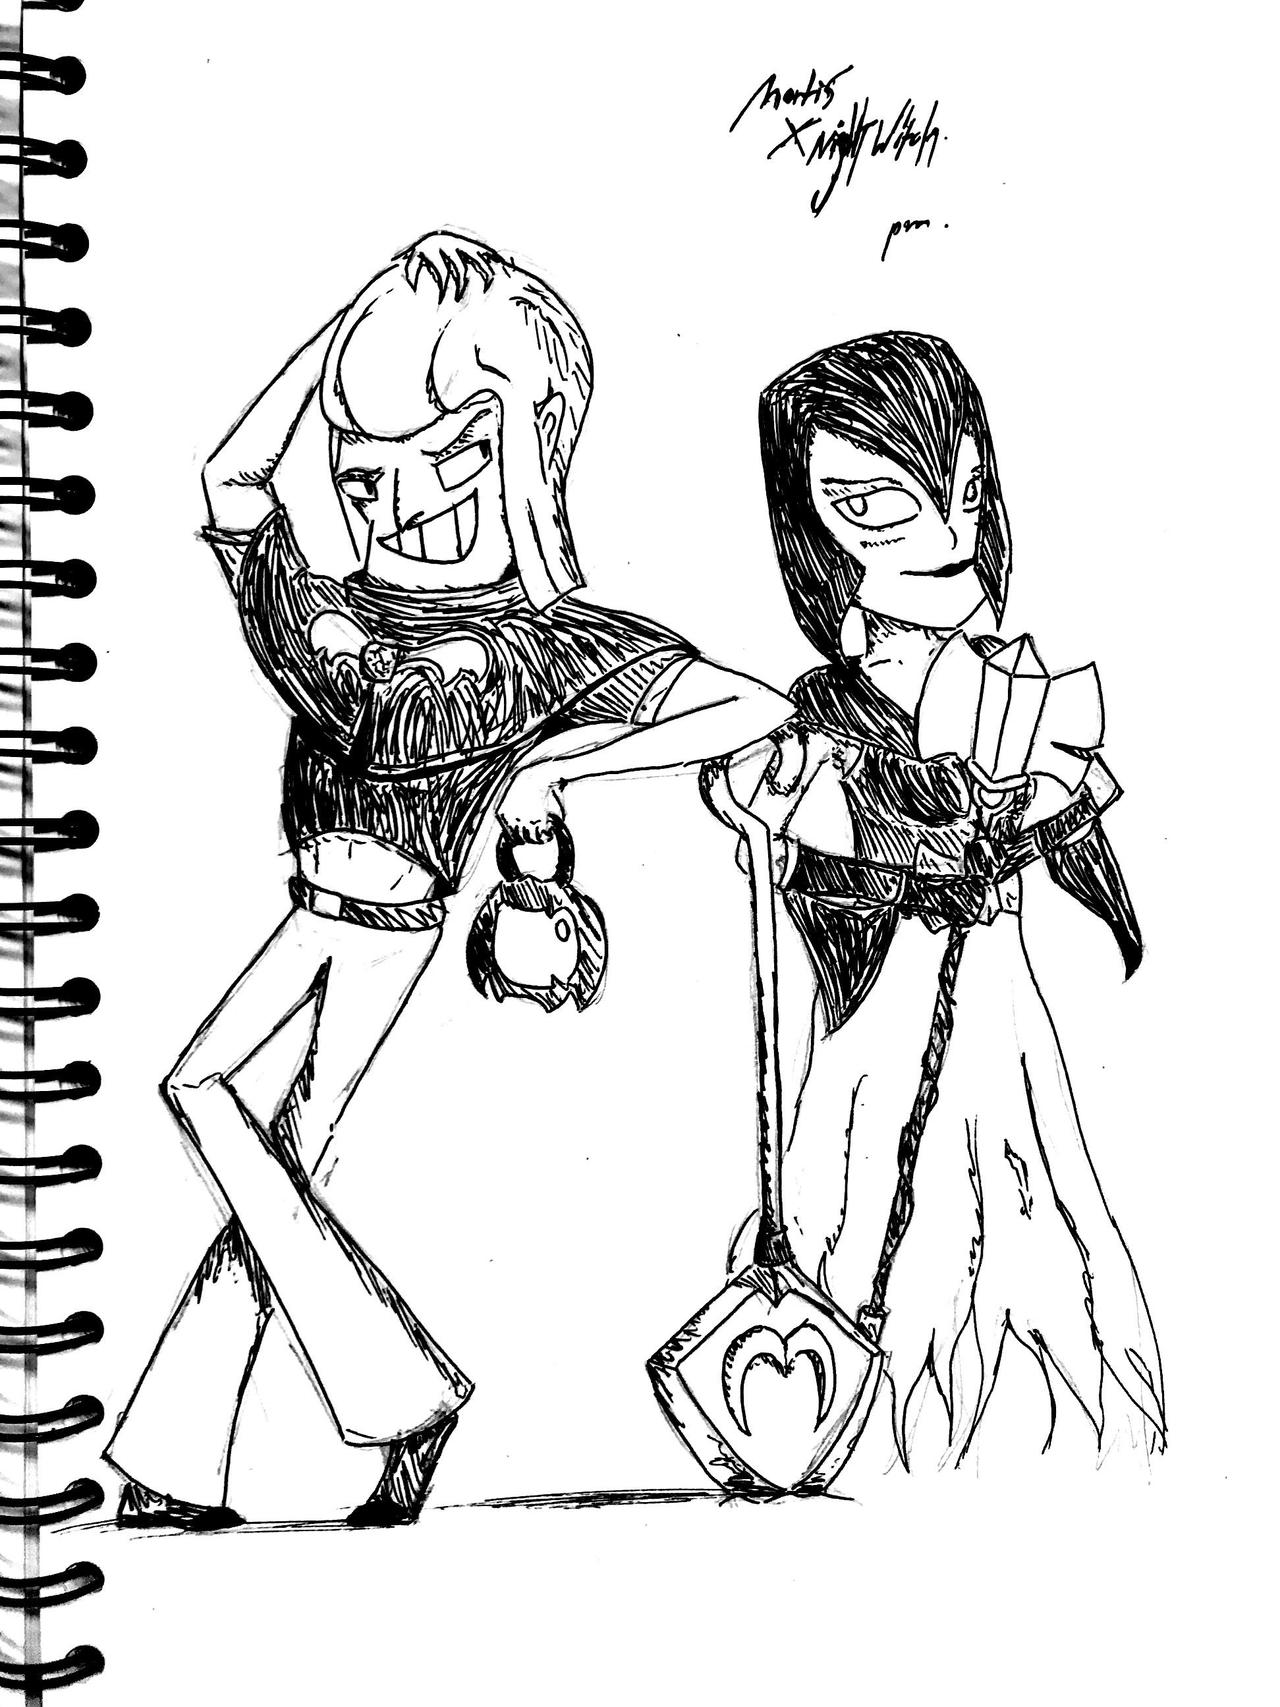 Mortis X Night Witch By Pm2983 On Deviantart - brawl stars night witch mortis drawing